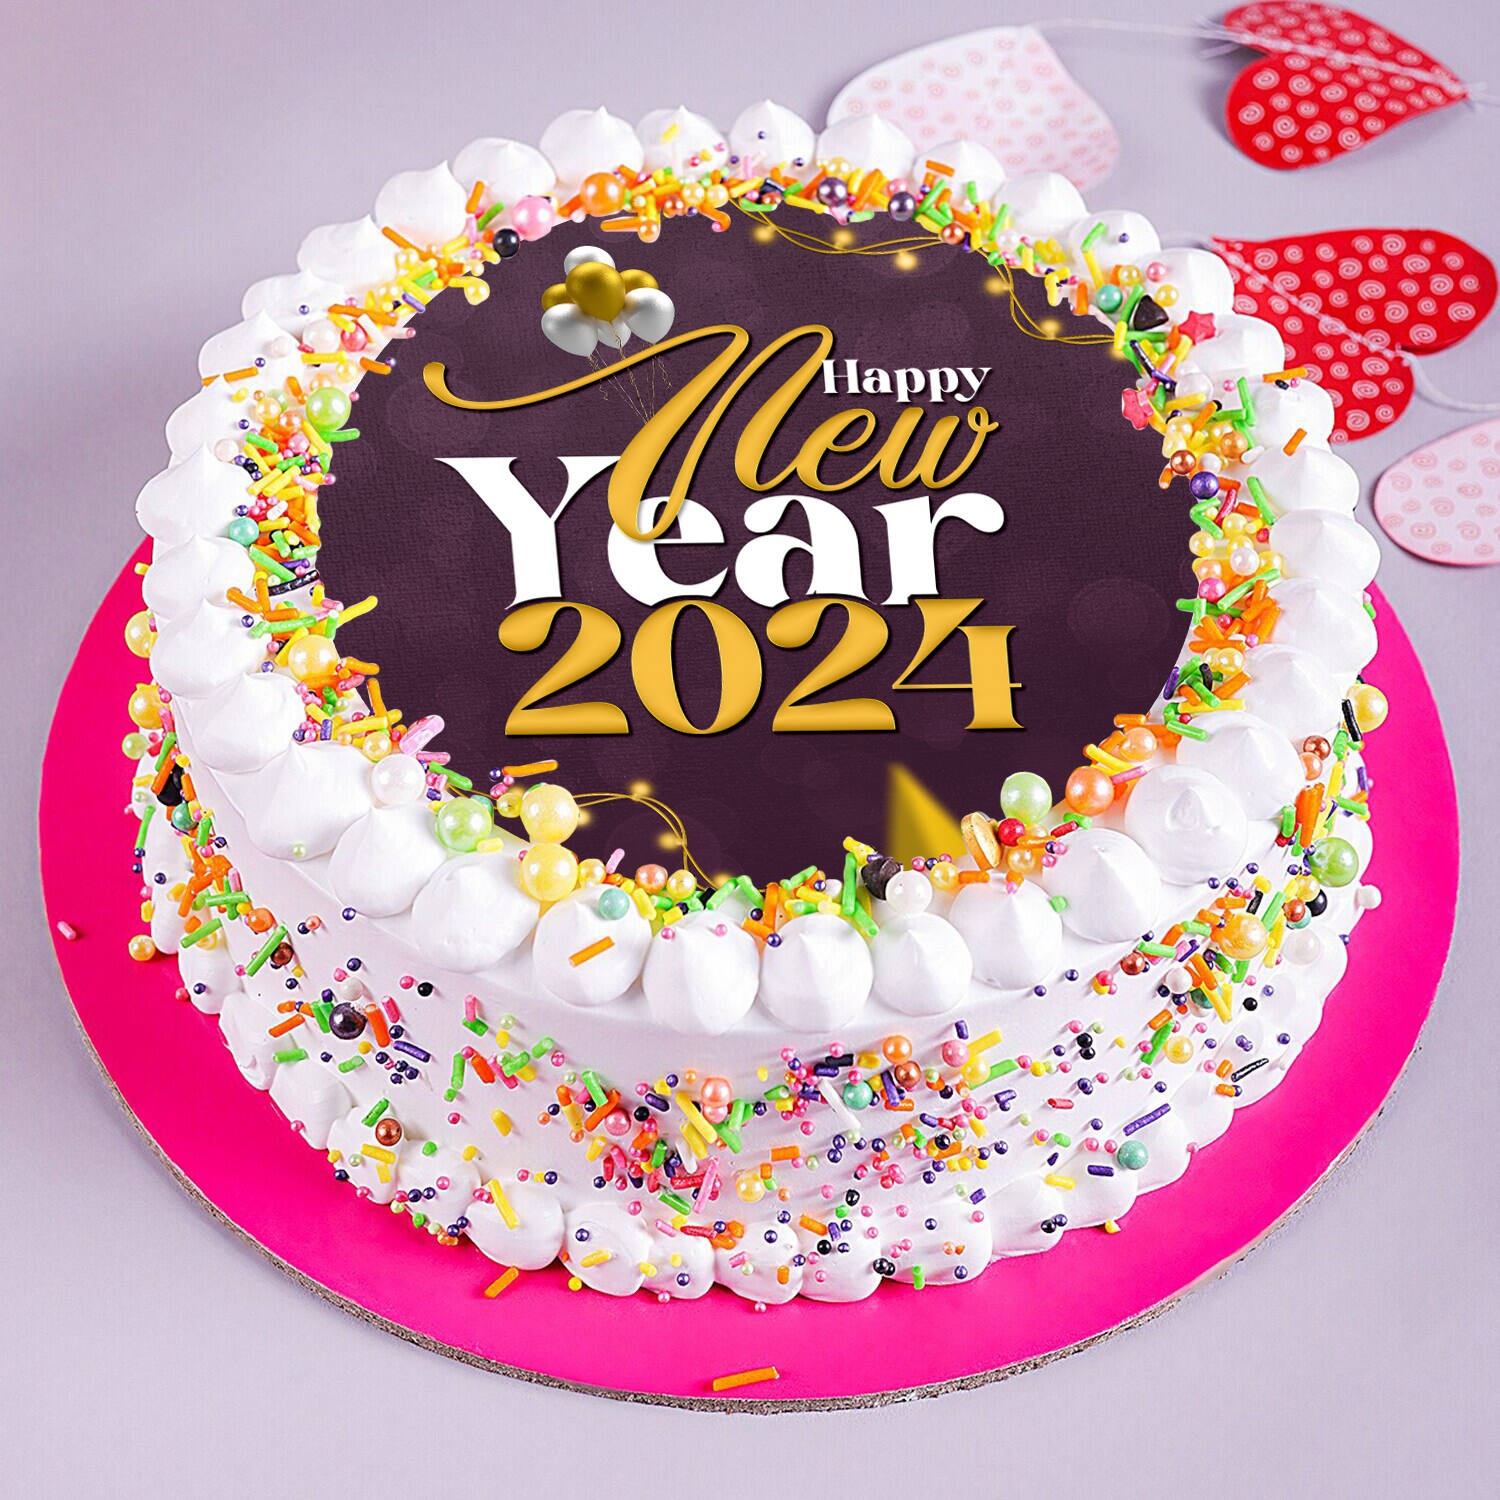 Home – Best Customized Cakes in Gurgaon & Delhi NCR